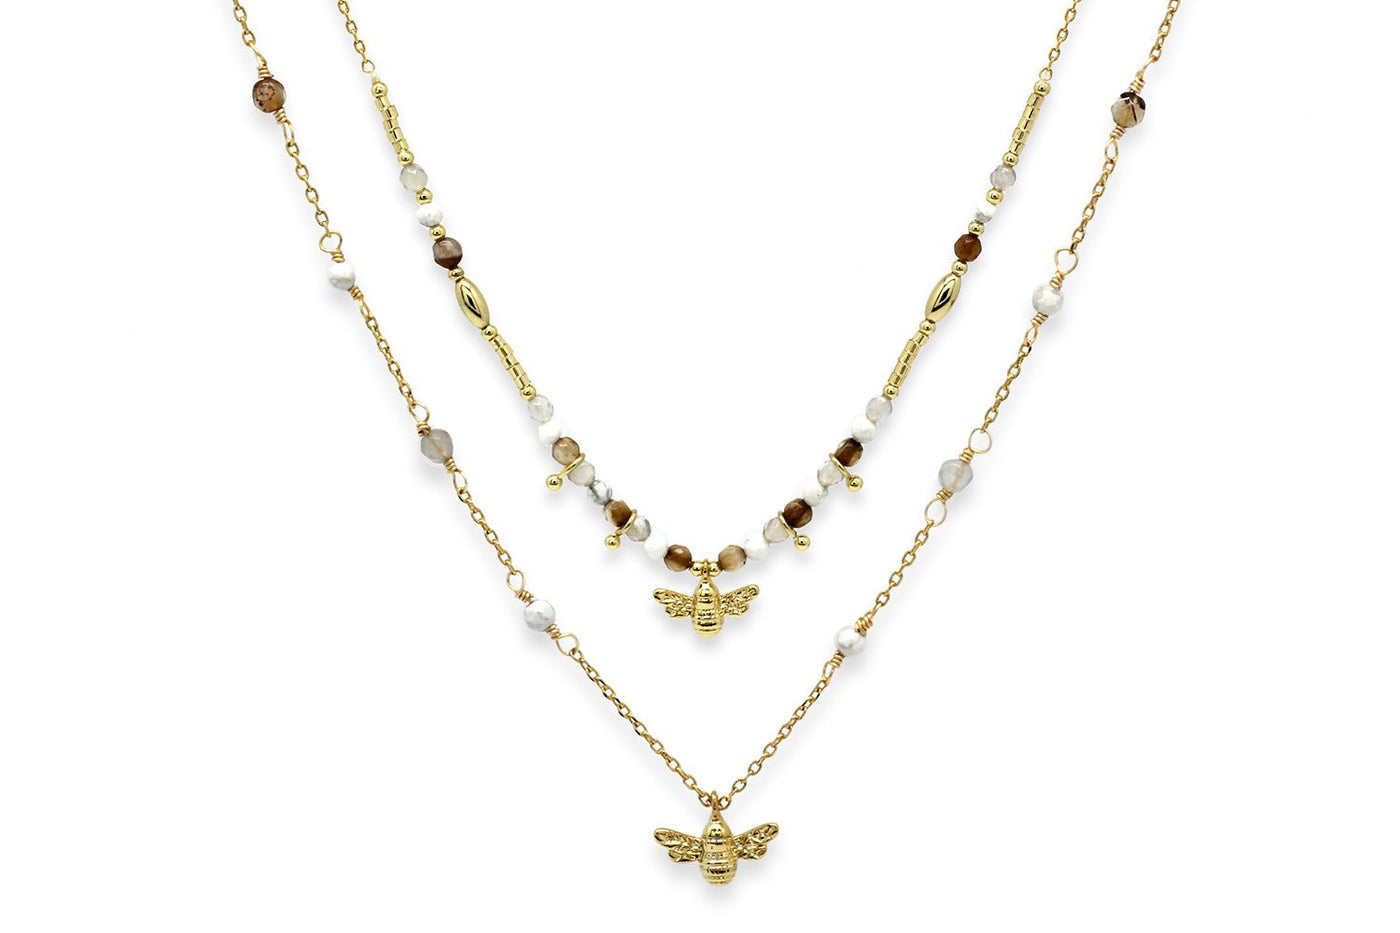 Andrena Bumble Bee Gemstone Necklace